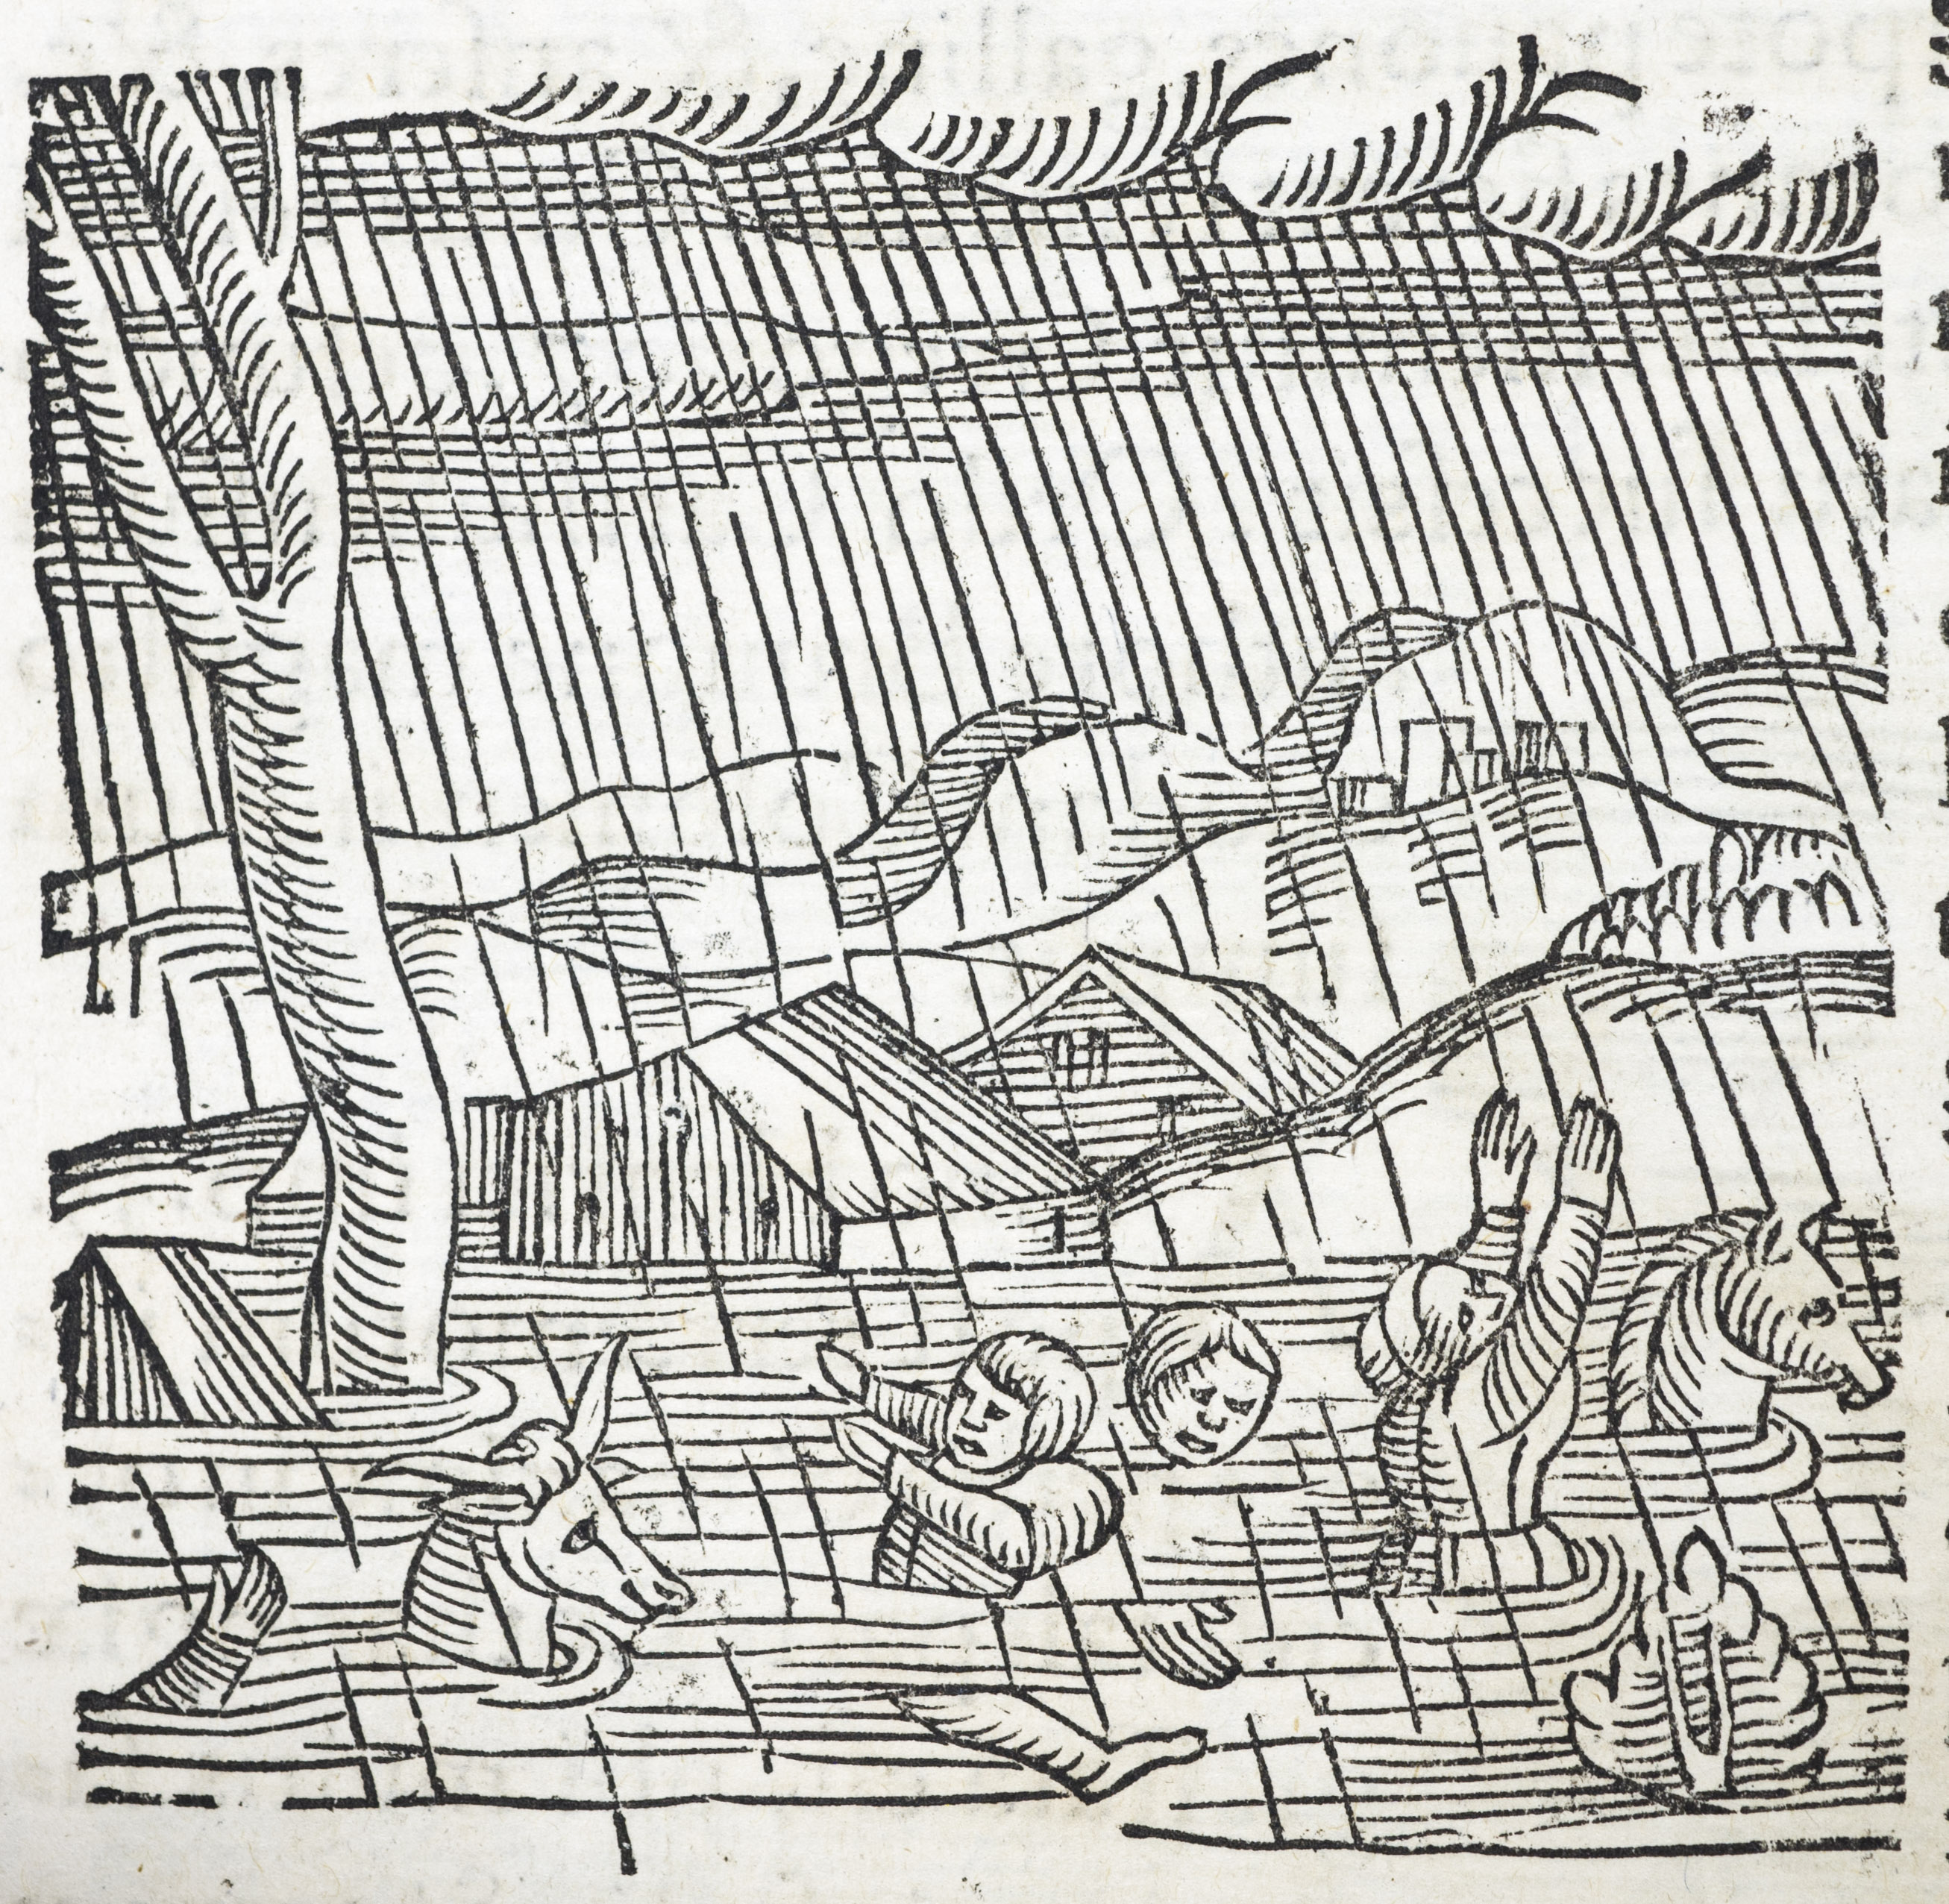 Woodcut image of people and animals swept away in a flood.